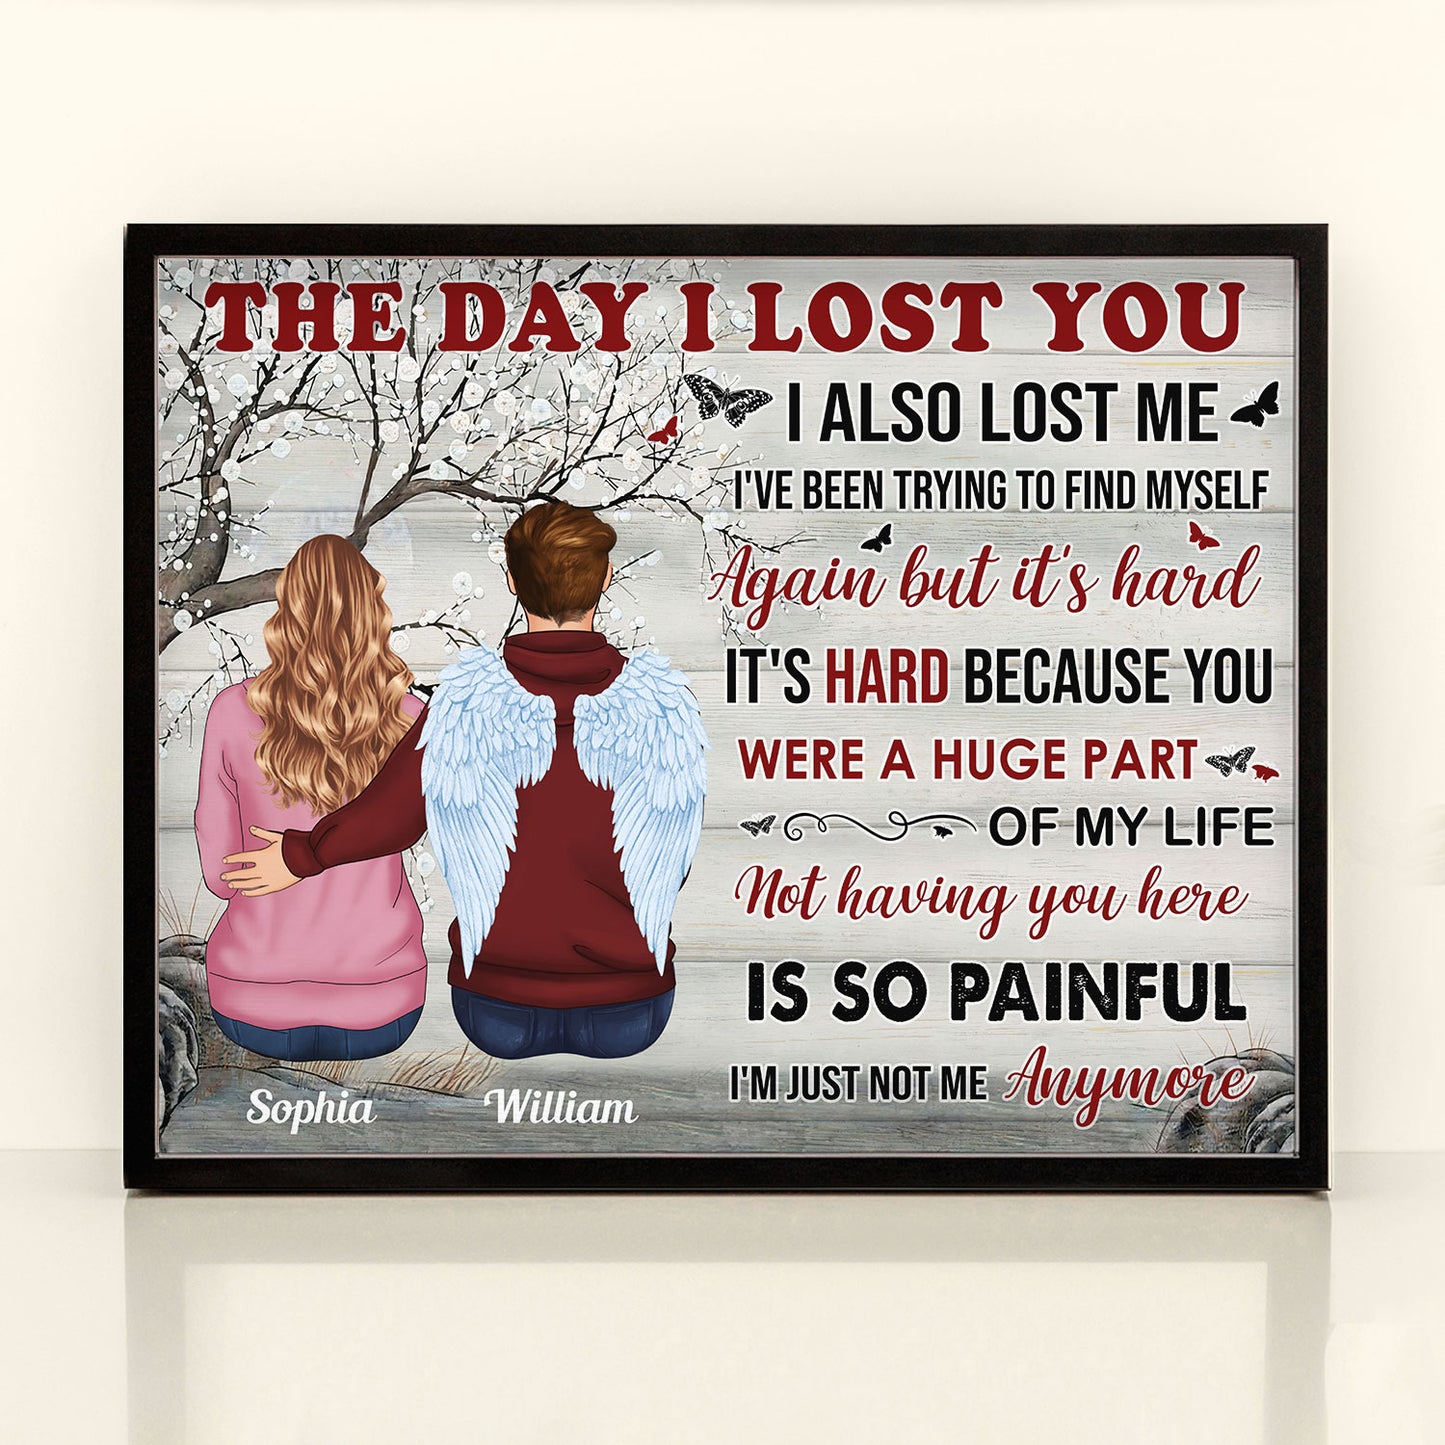 You Were A Huge Part Of My Life - Personalized Poster - Memorial Gift For Widow, Widowes